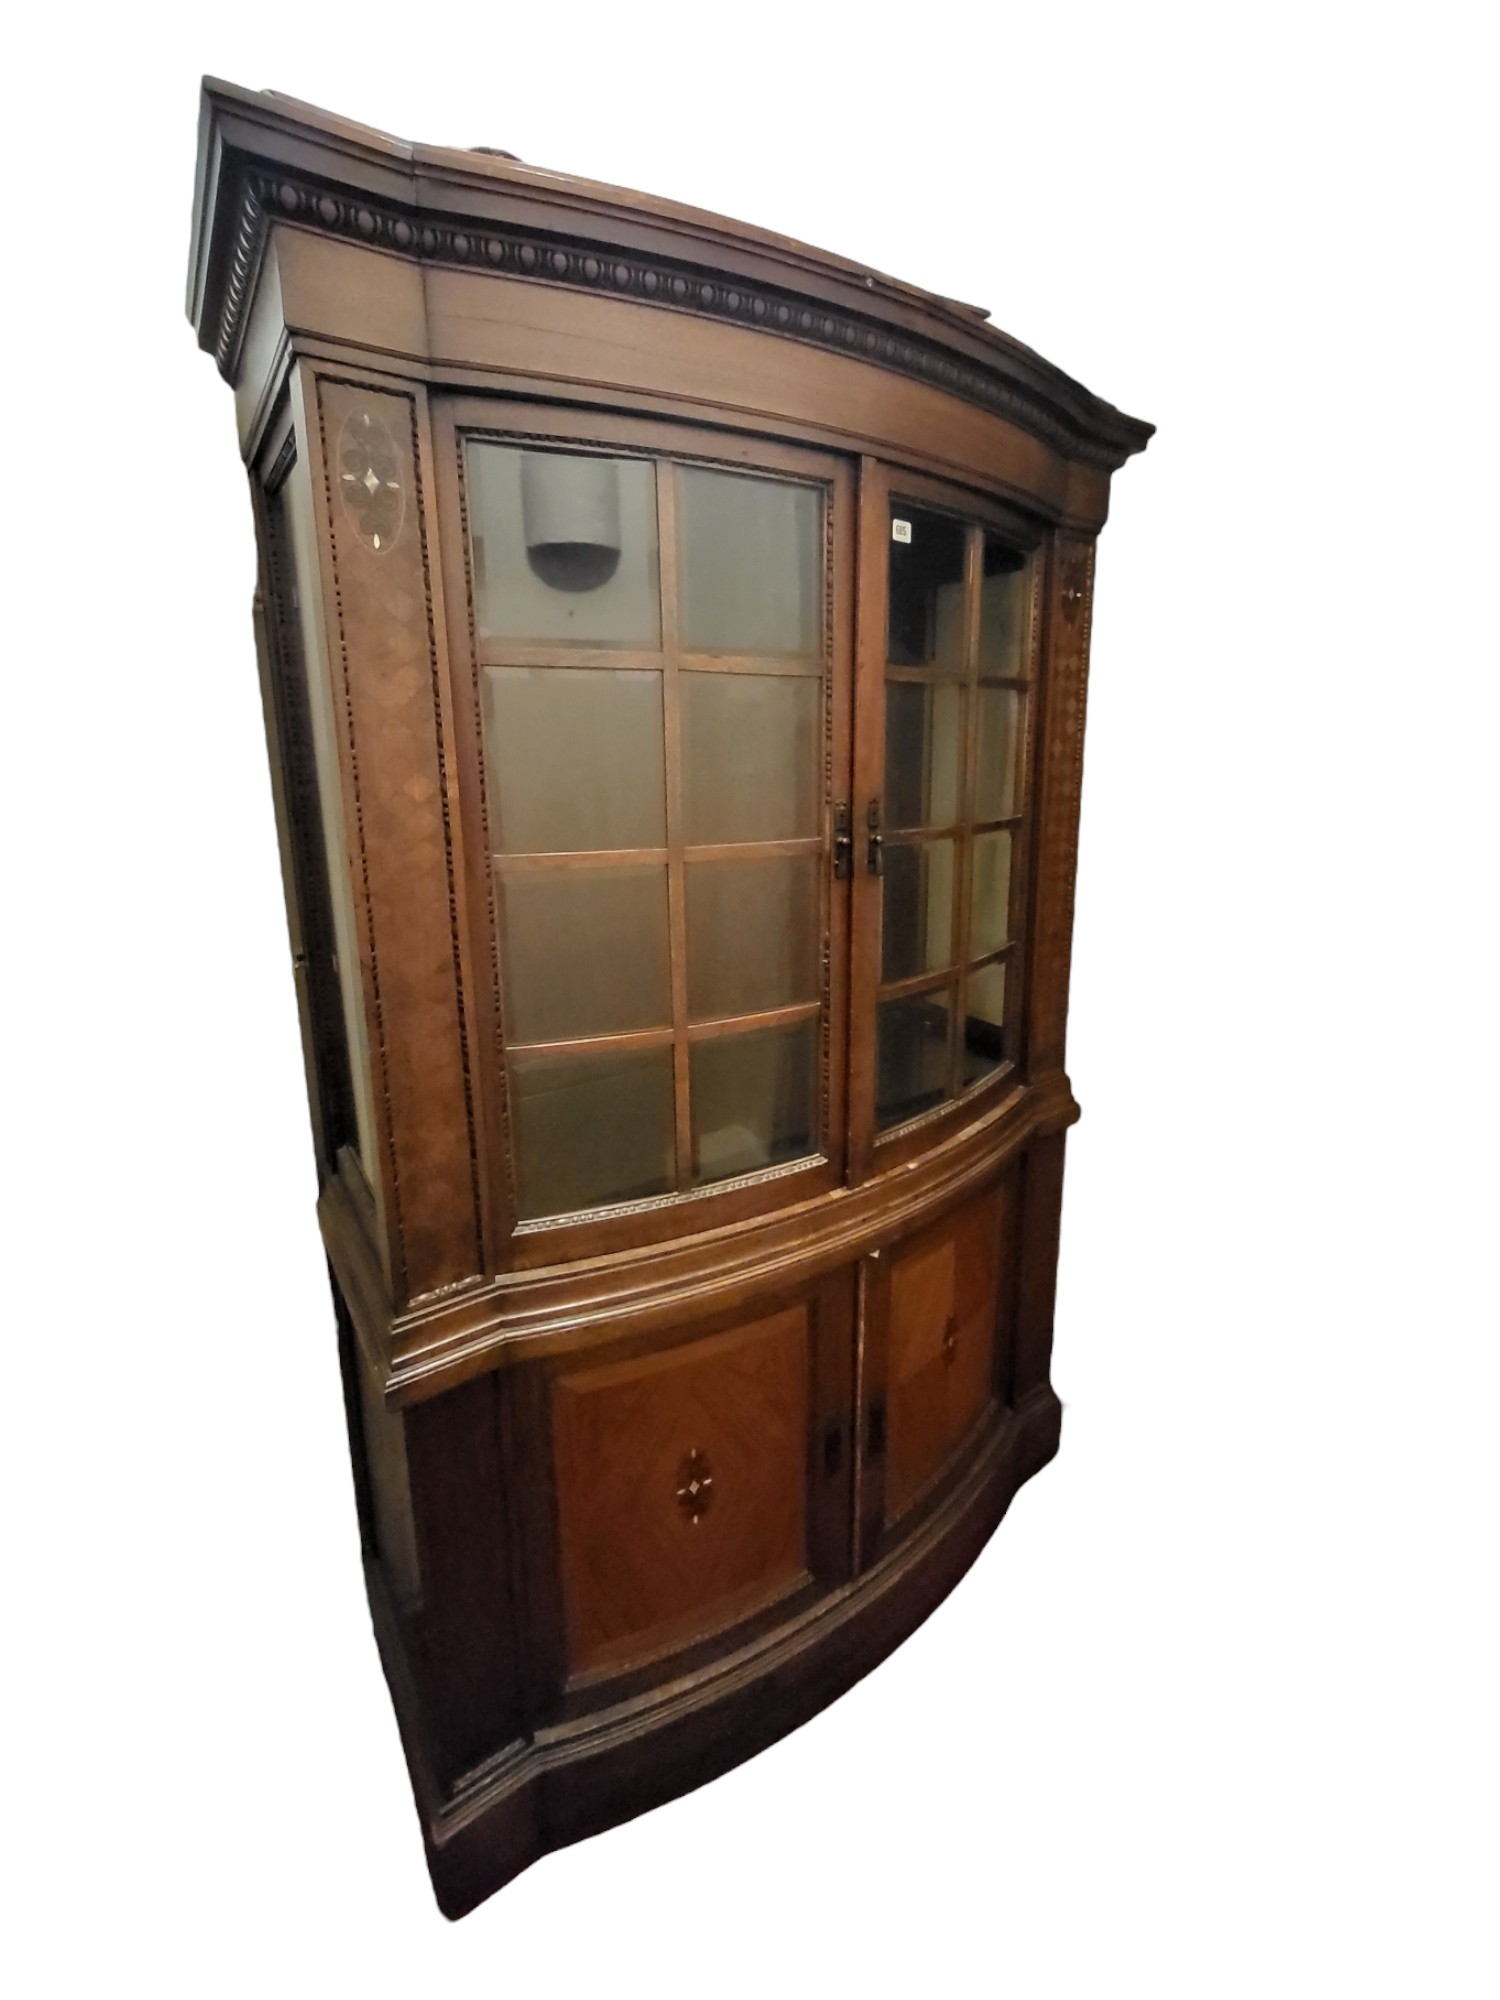 A LATE 19TH CENTURY AUSTRIAN MAHOGANY AND MOTHER OF PEARL INLAID DISPLAY CABINET BOOKCASE With two